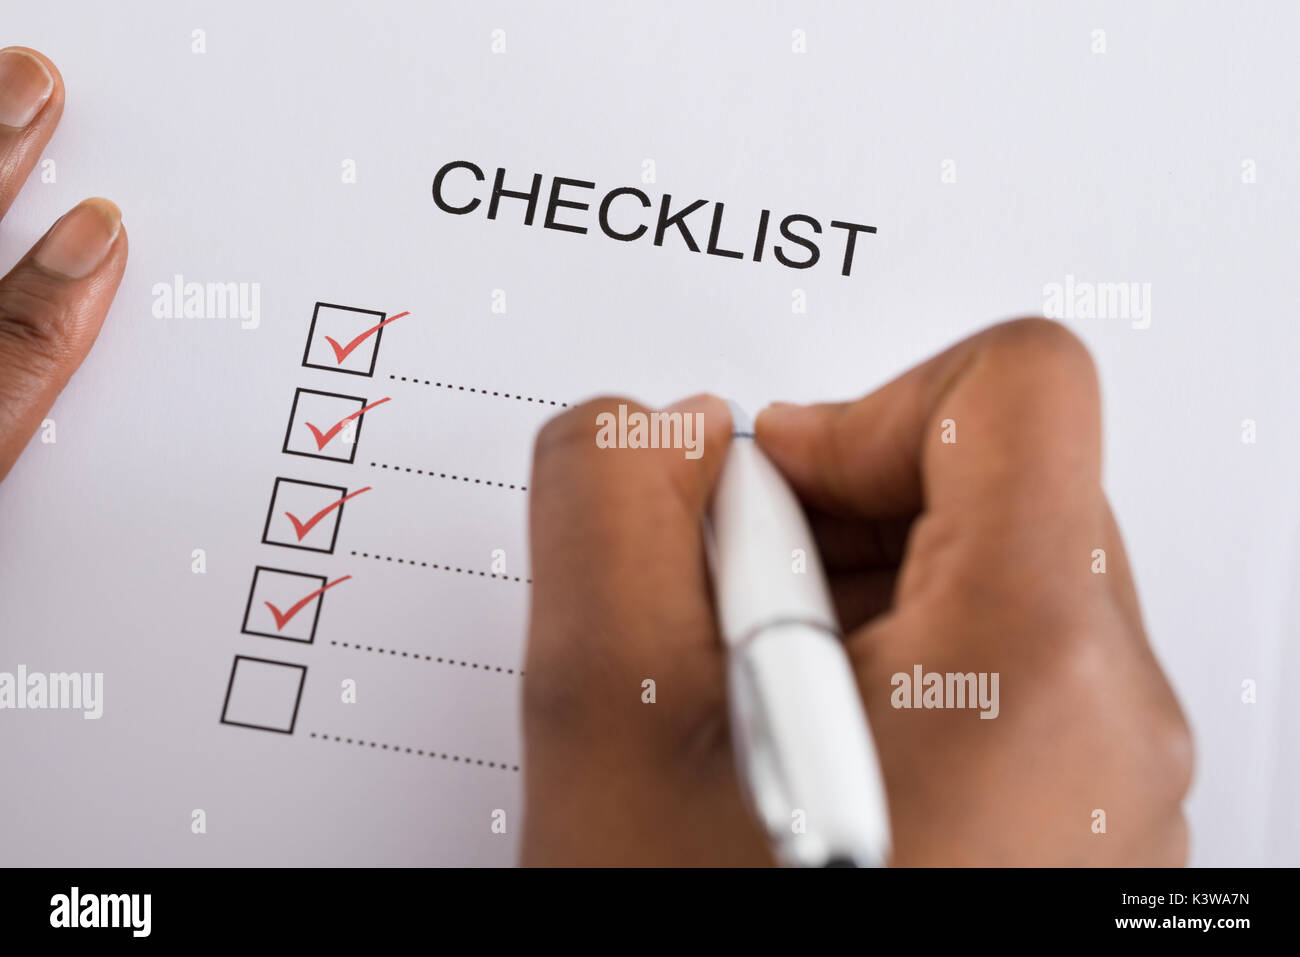 Person's Hand Marking Check Box With Red Pen On Checklist Form Stock Photo